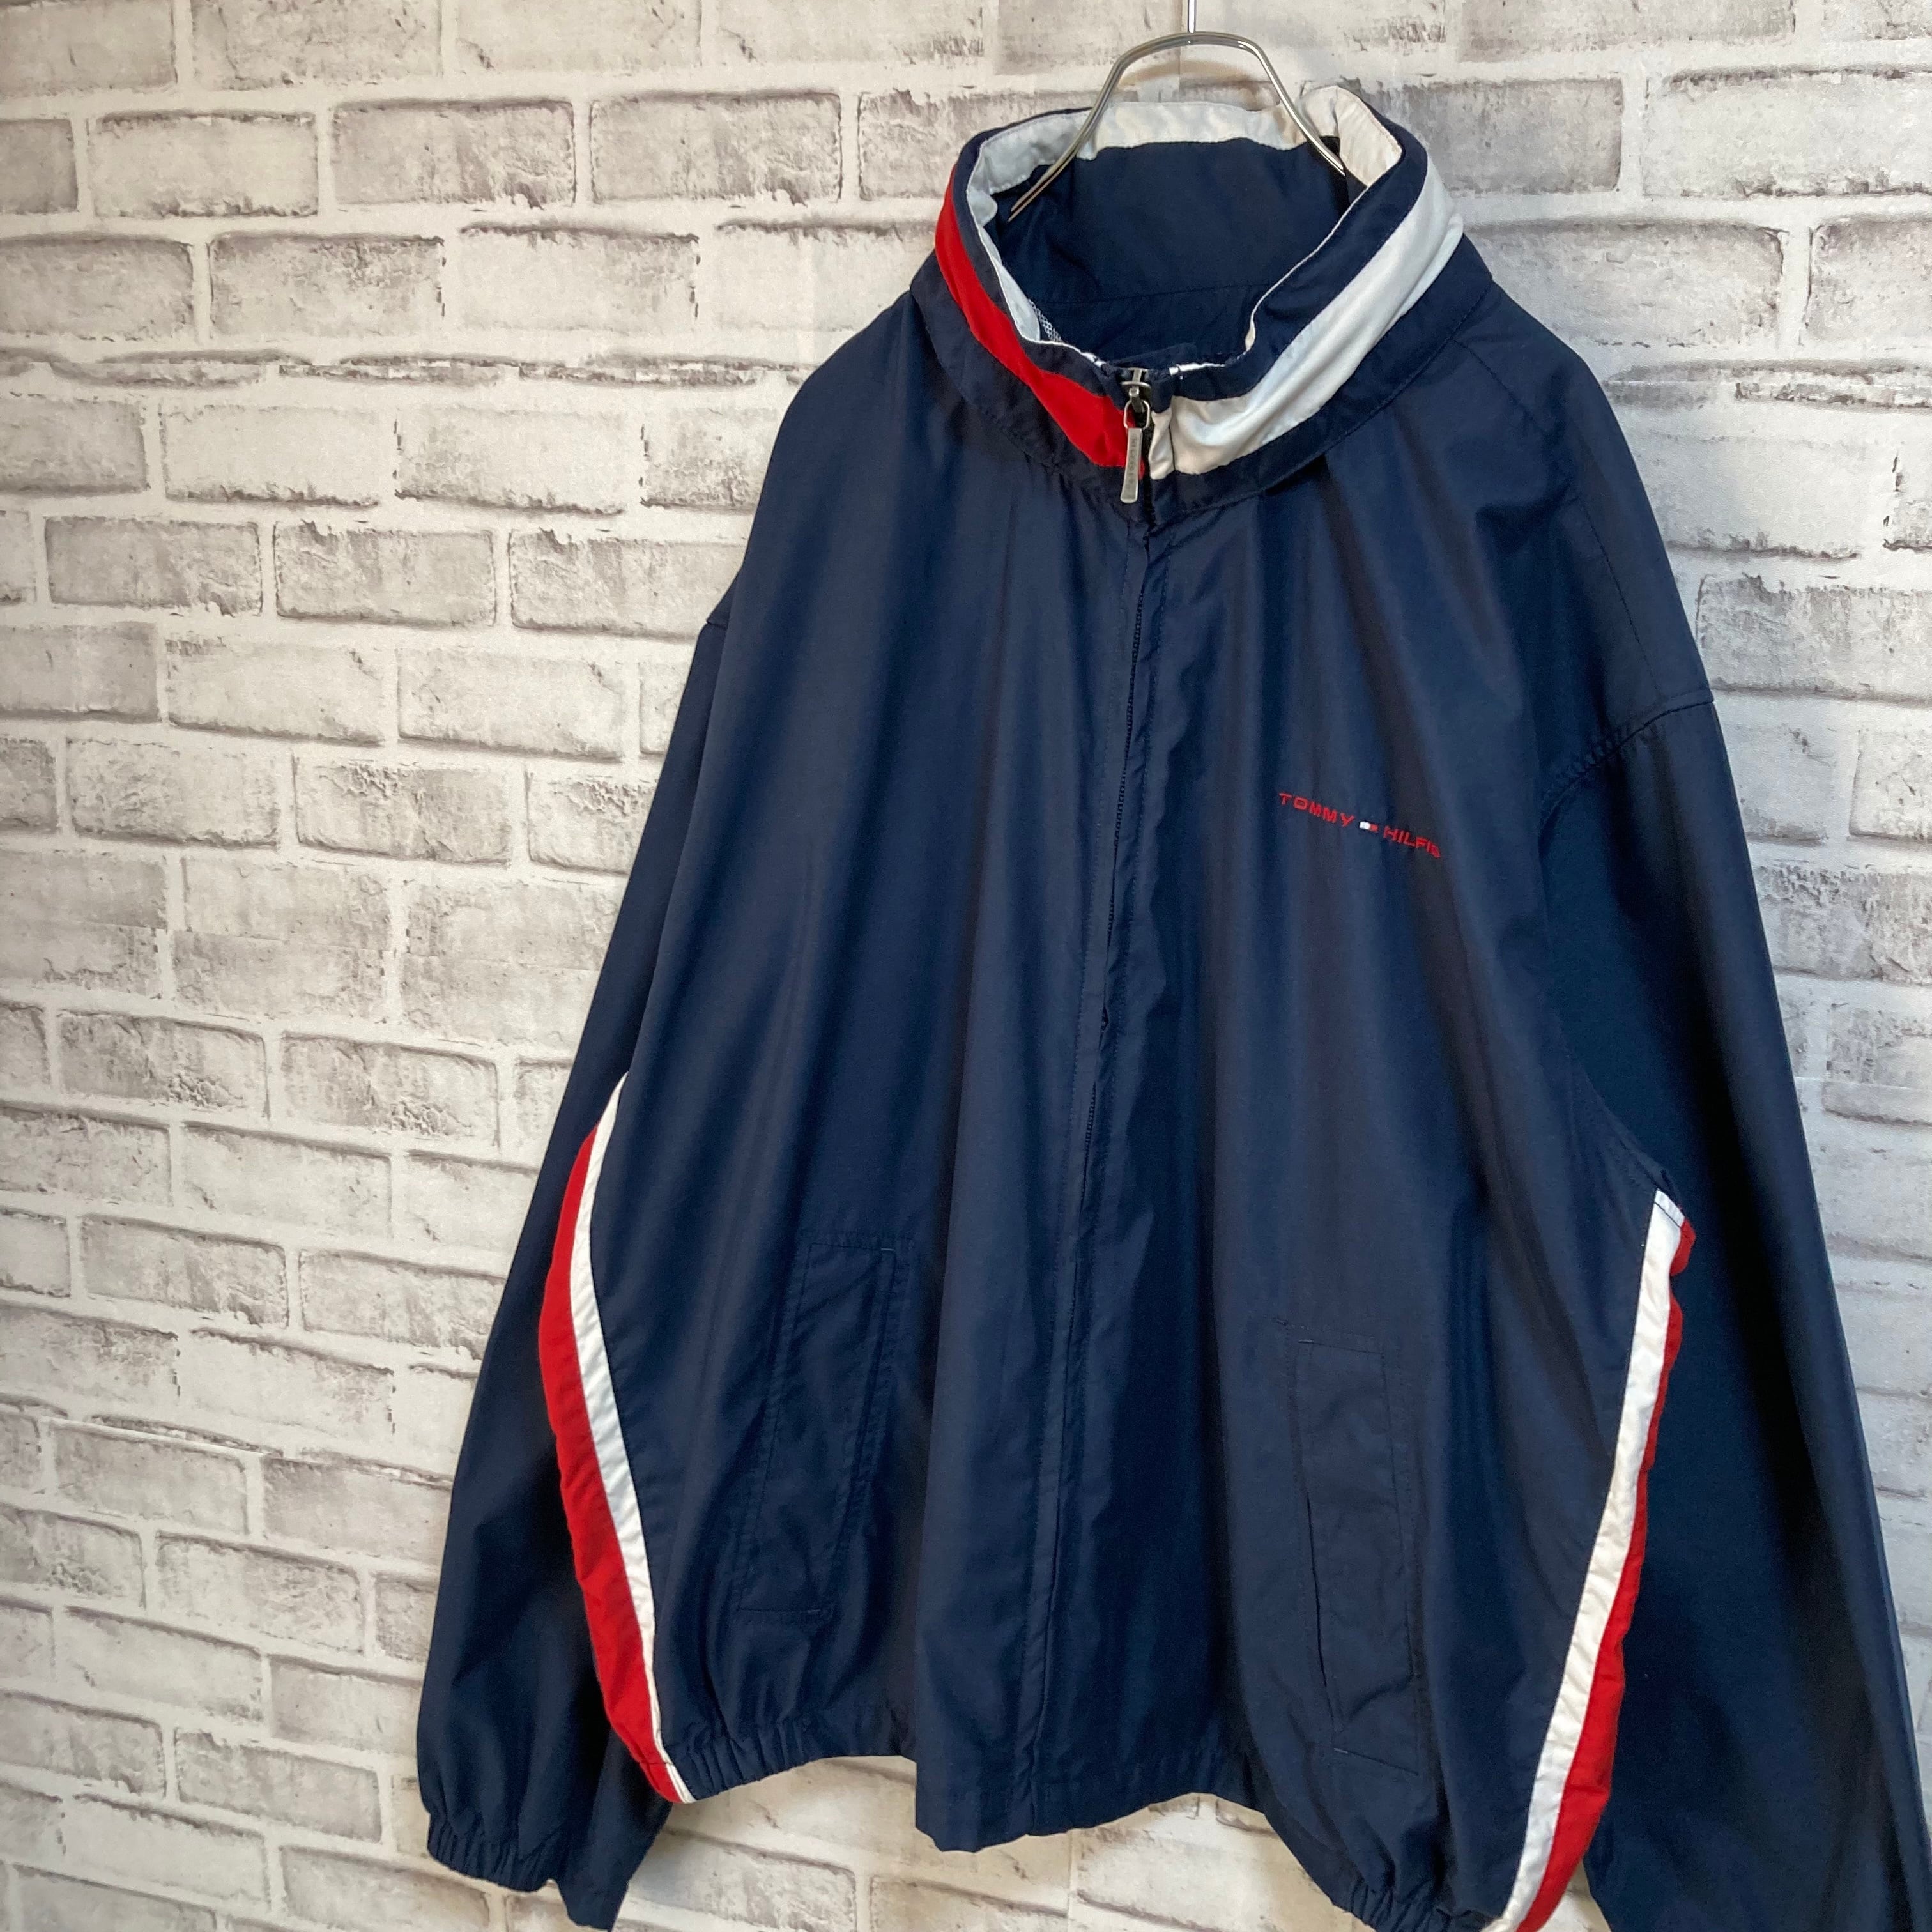 TOMMY HILFIGER】 Nylon Jacket XXL “TOMMY COLOR” トミーヒルフィガー ...